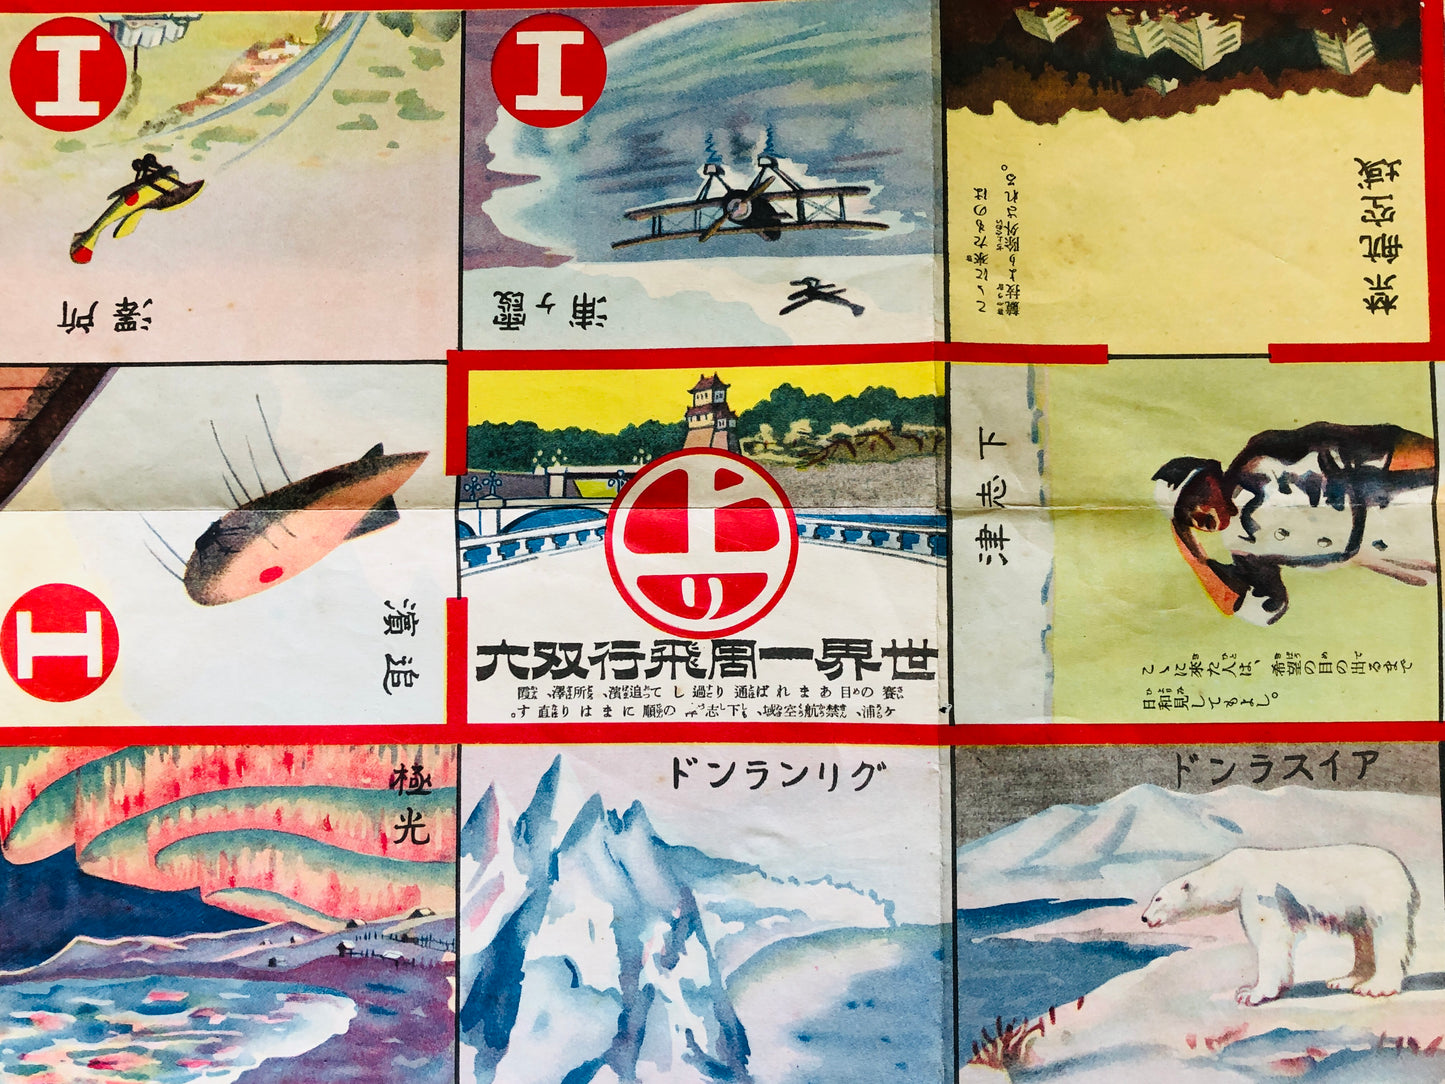 Y5281 SUGOROKU Round-the-world flight board game paper one-sided Japan antique